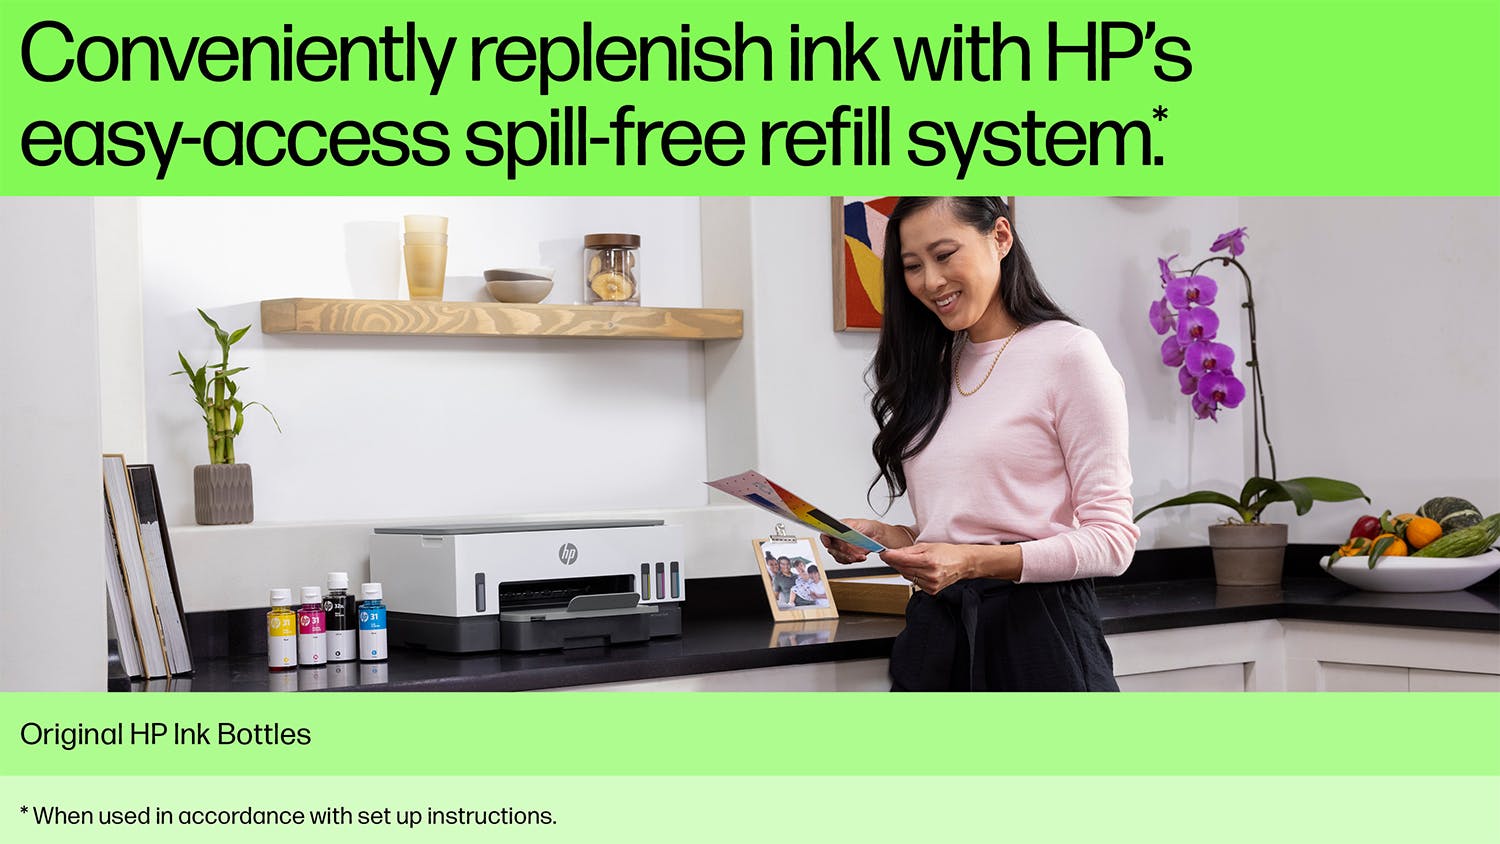 HP Smart Tank 7005 All-in-One Multi-Function Printer